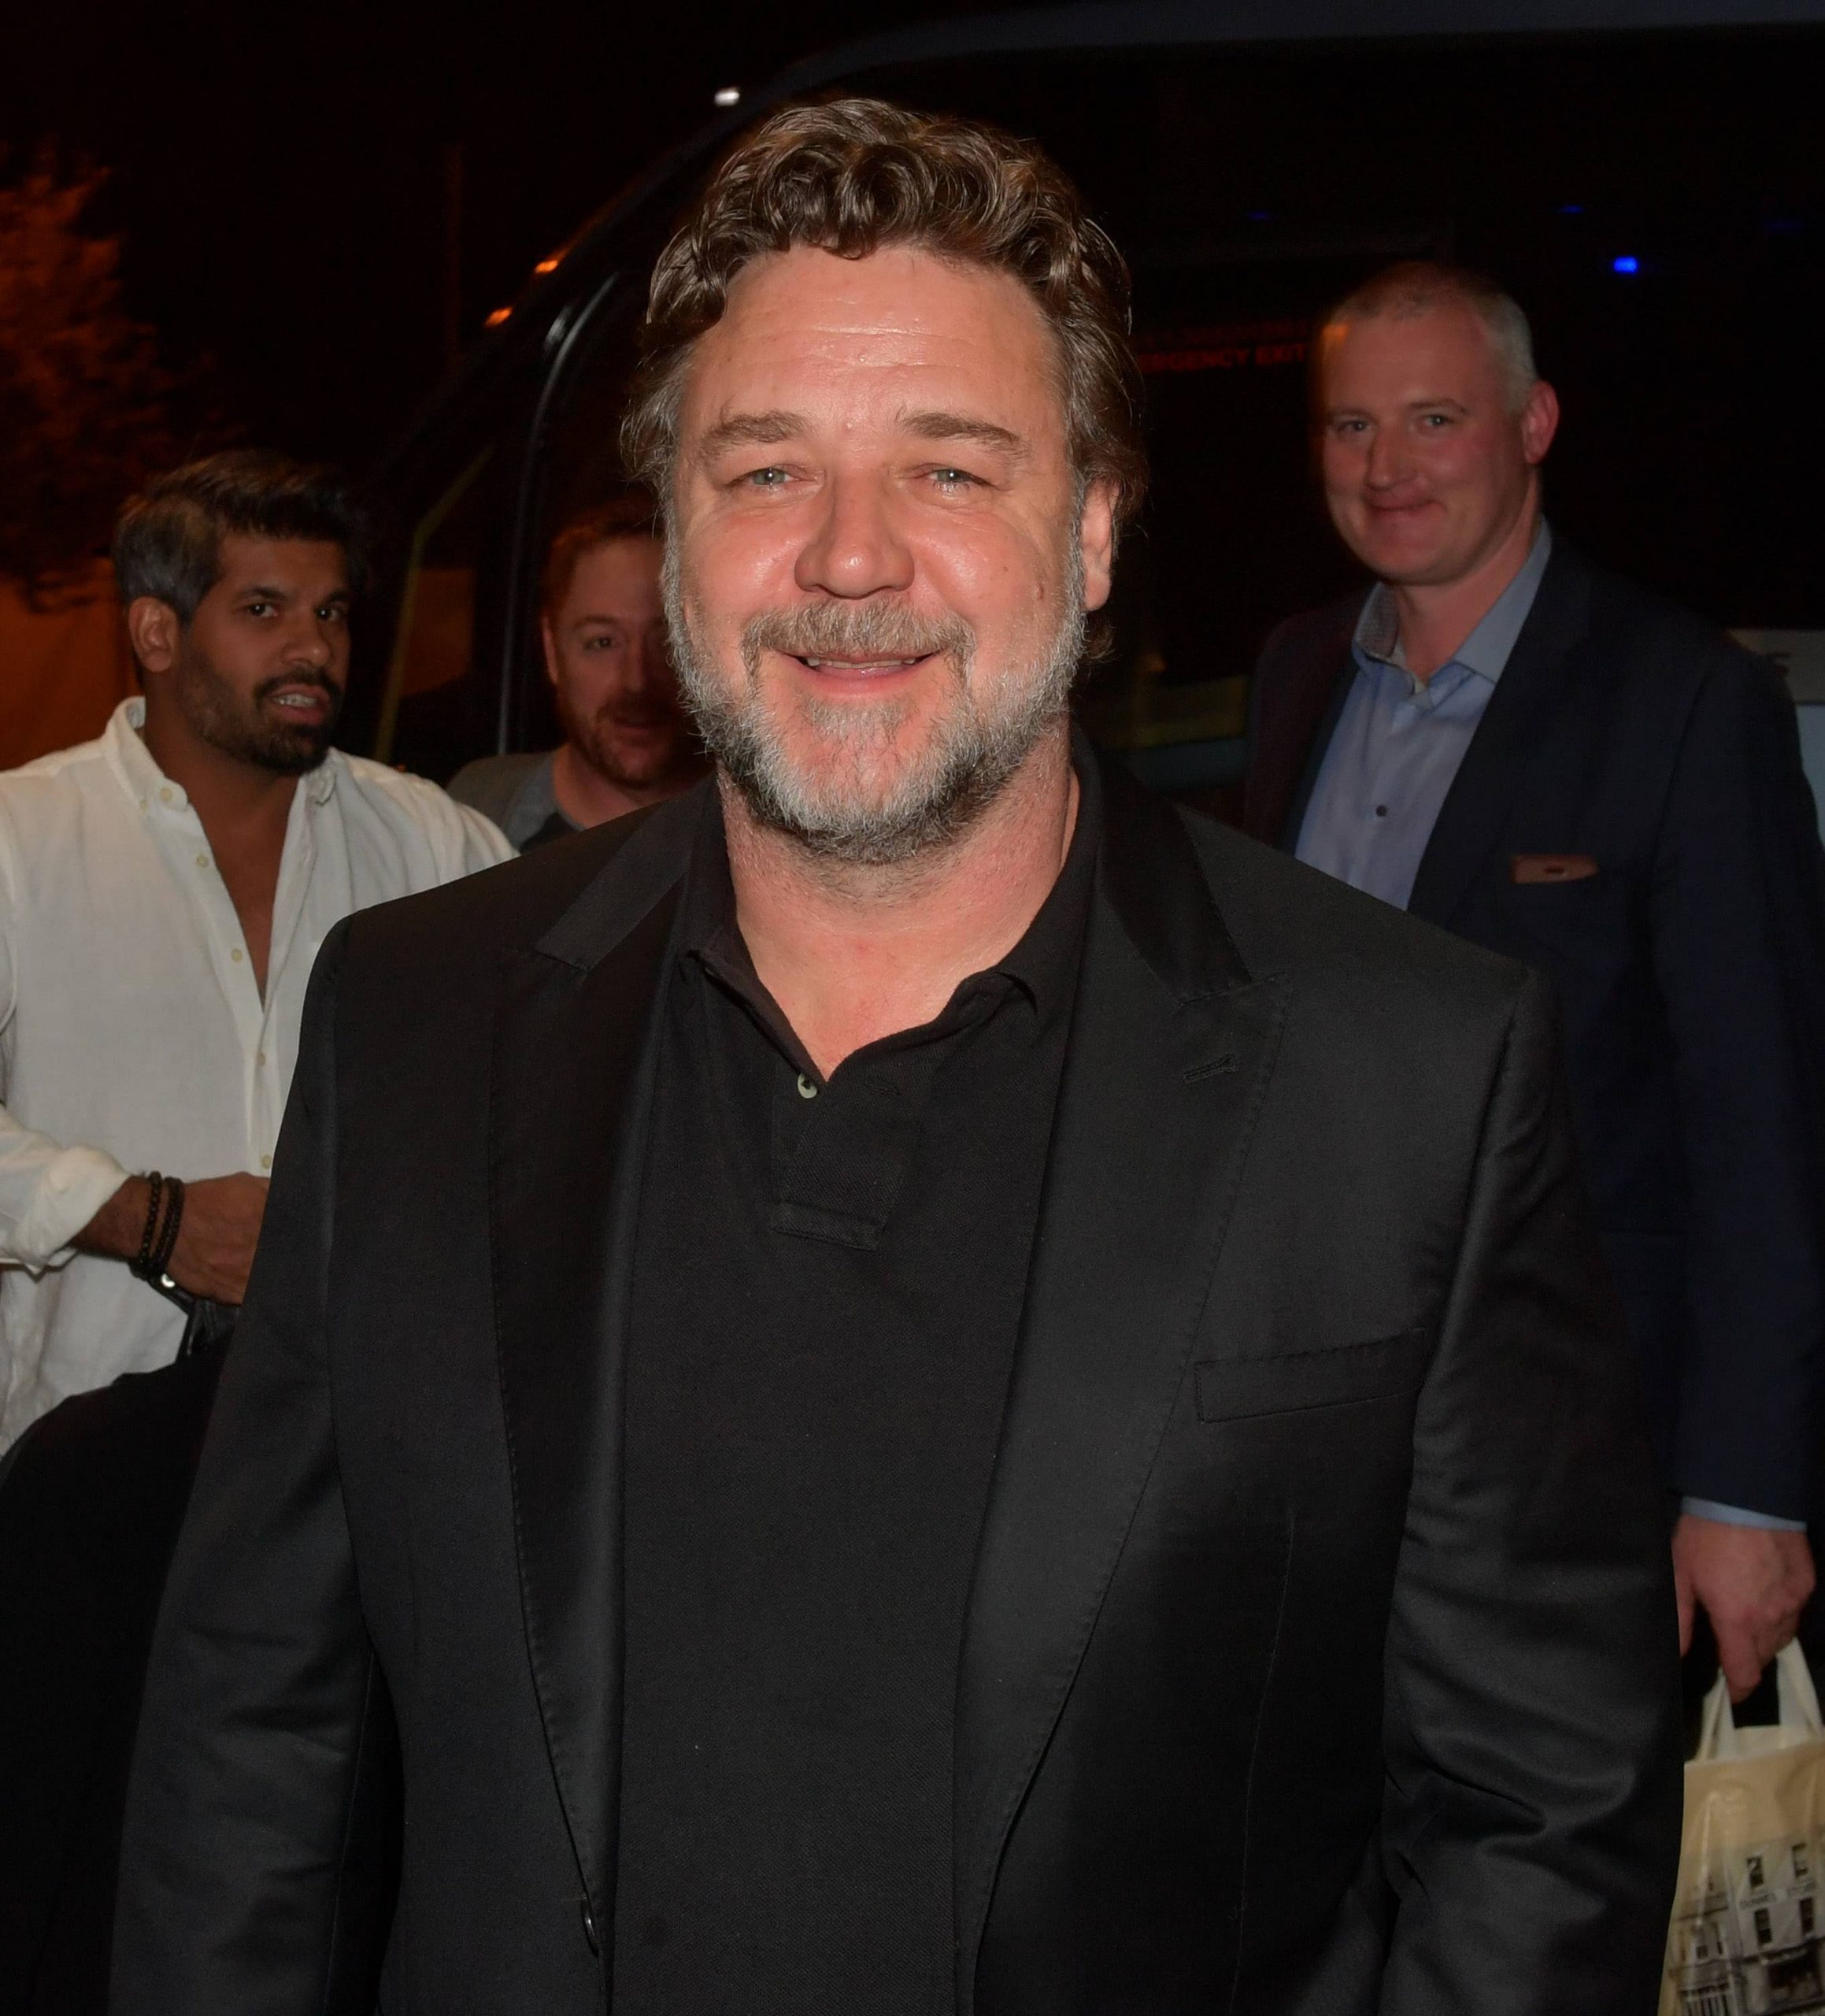 Ireland has a new A-Lister resident as Russell Crowe has touched down ...